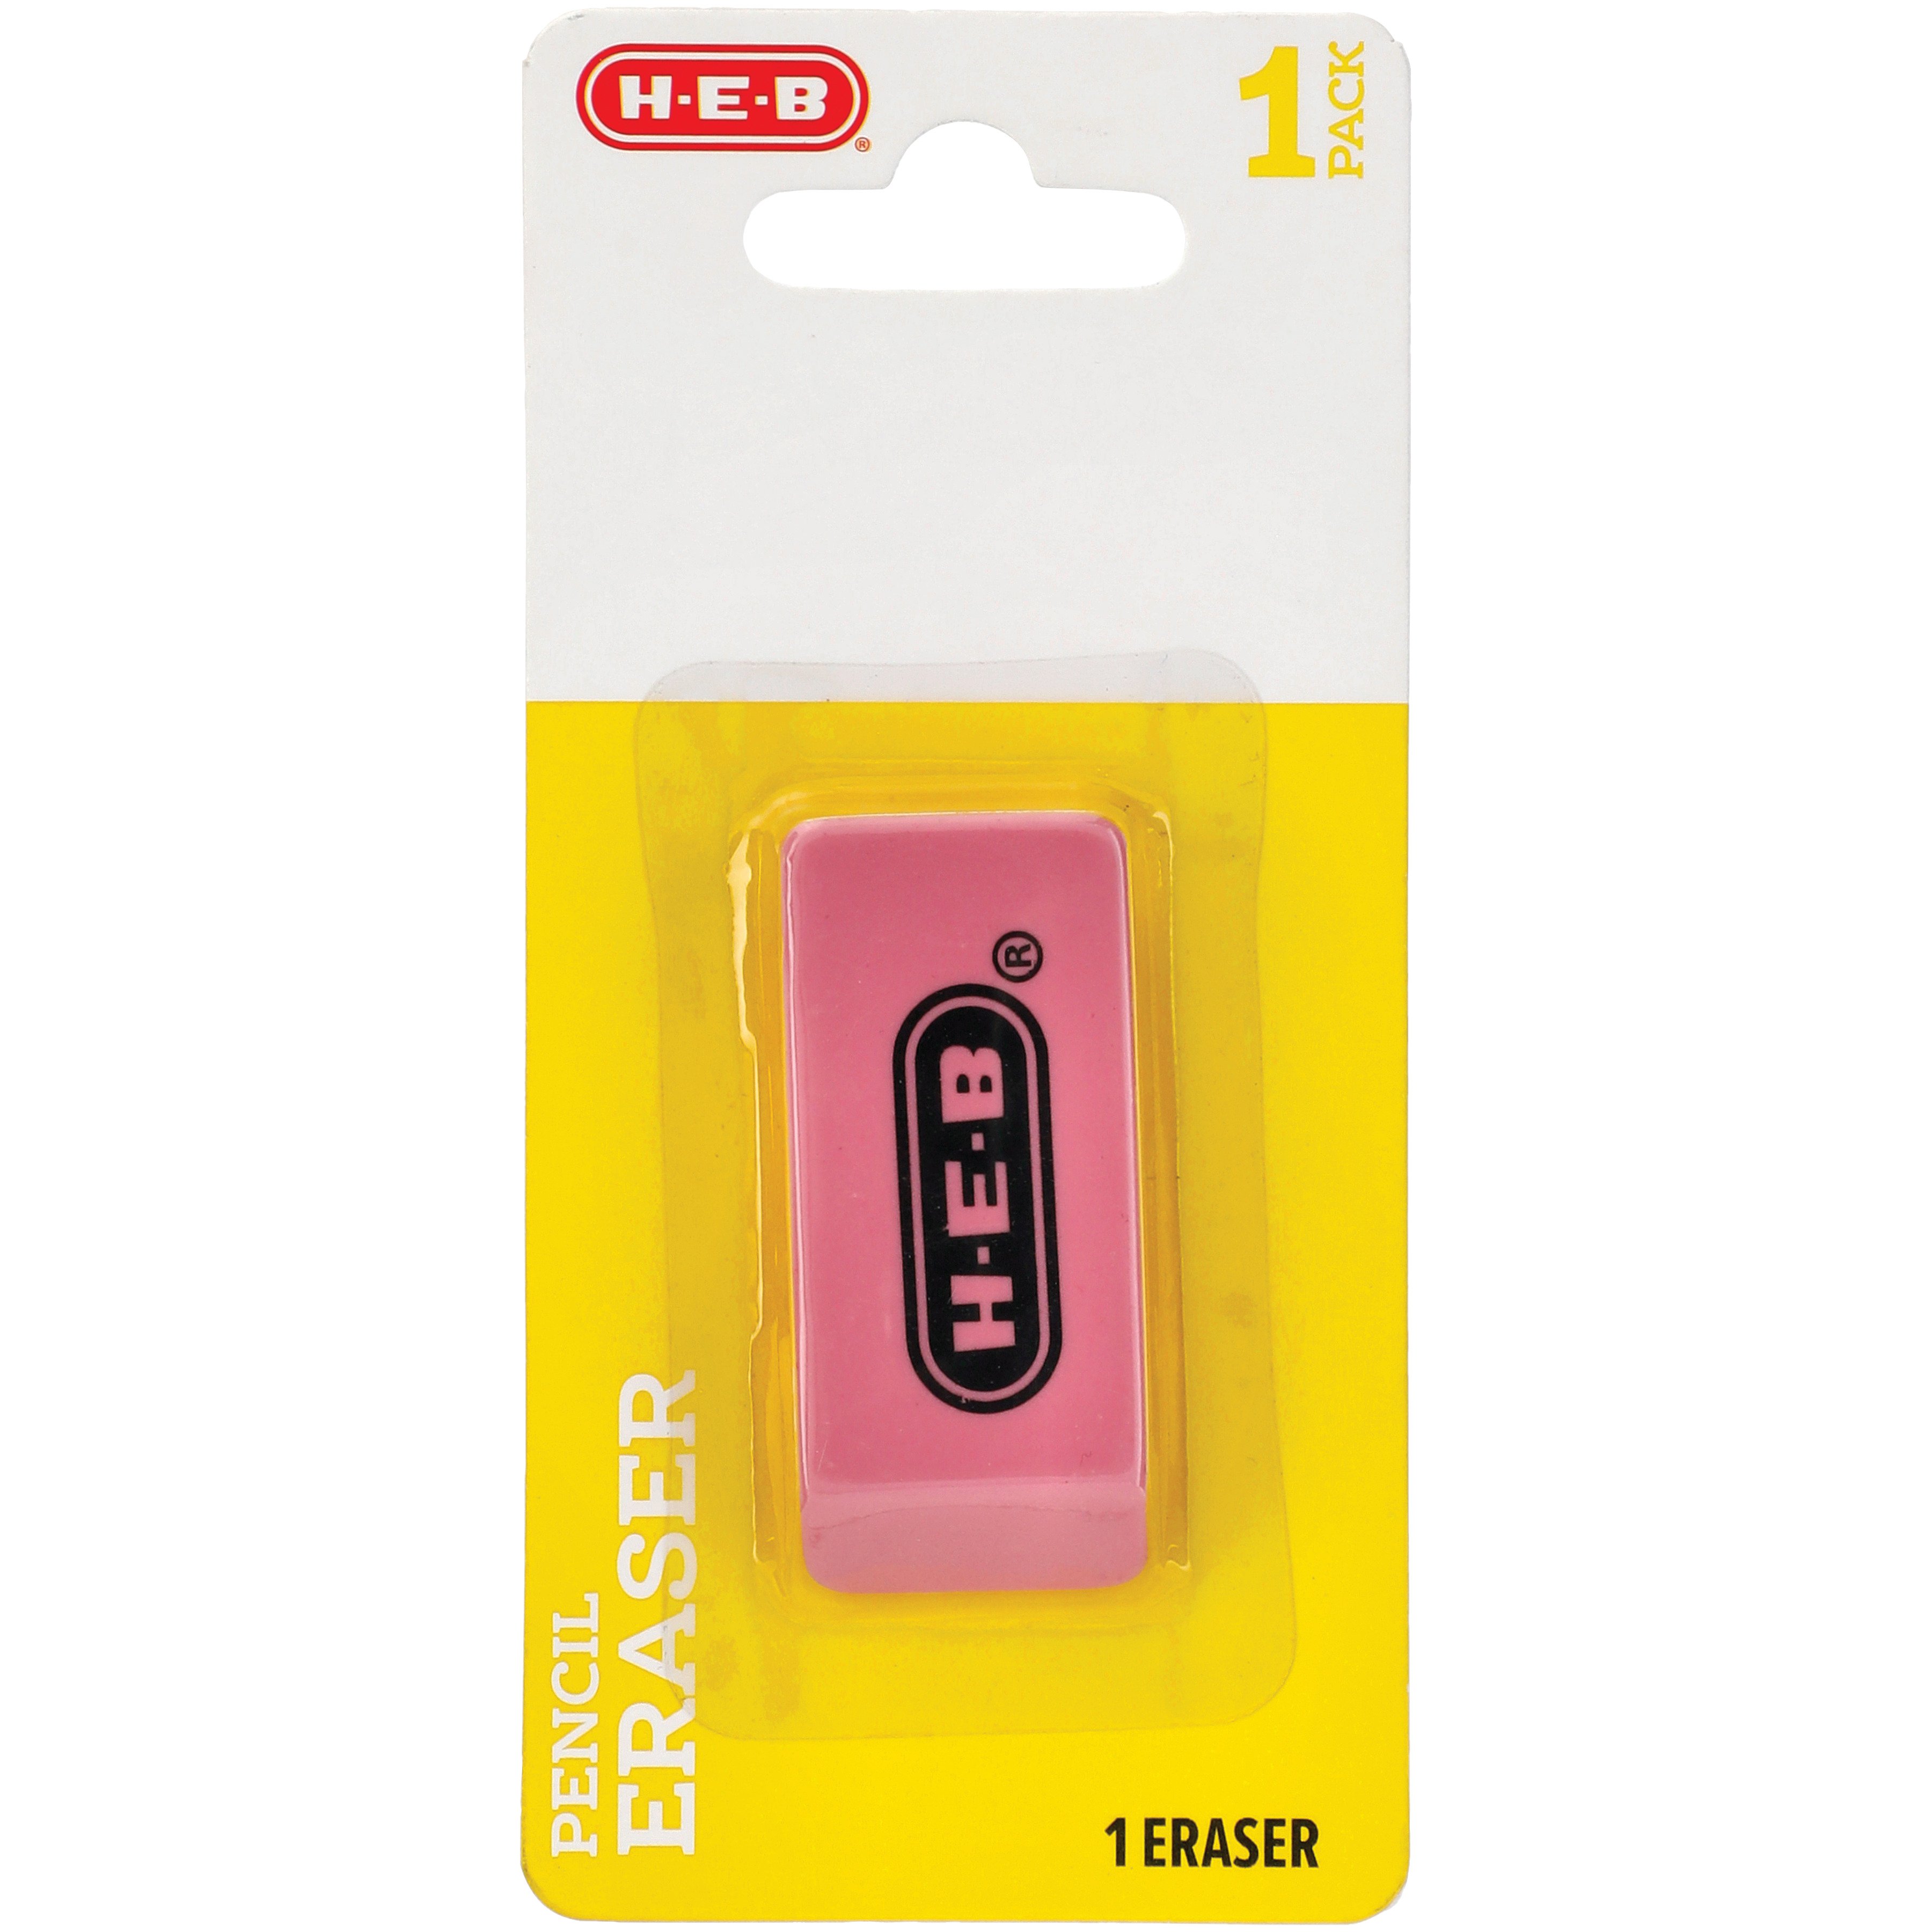 Pencil Erasers & Pen Erasers in Erasers & Correction Products